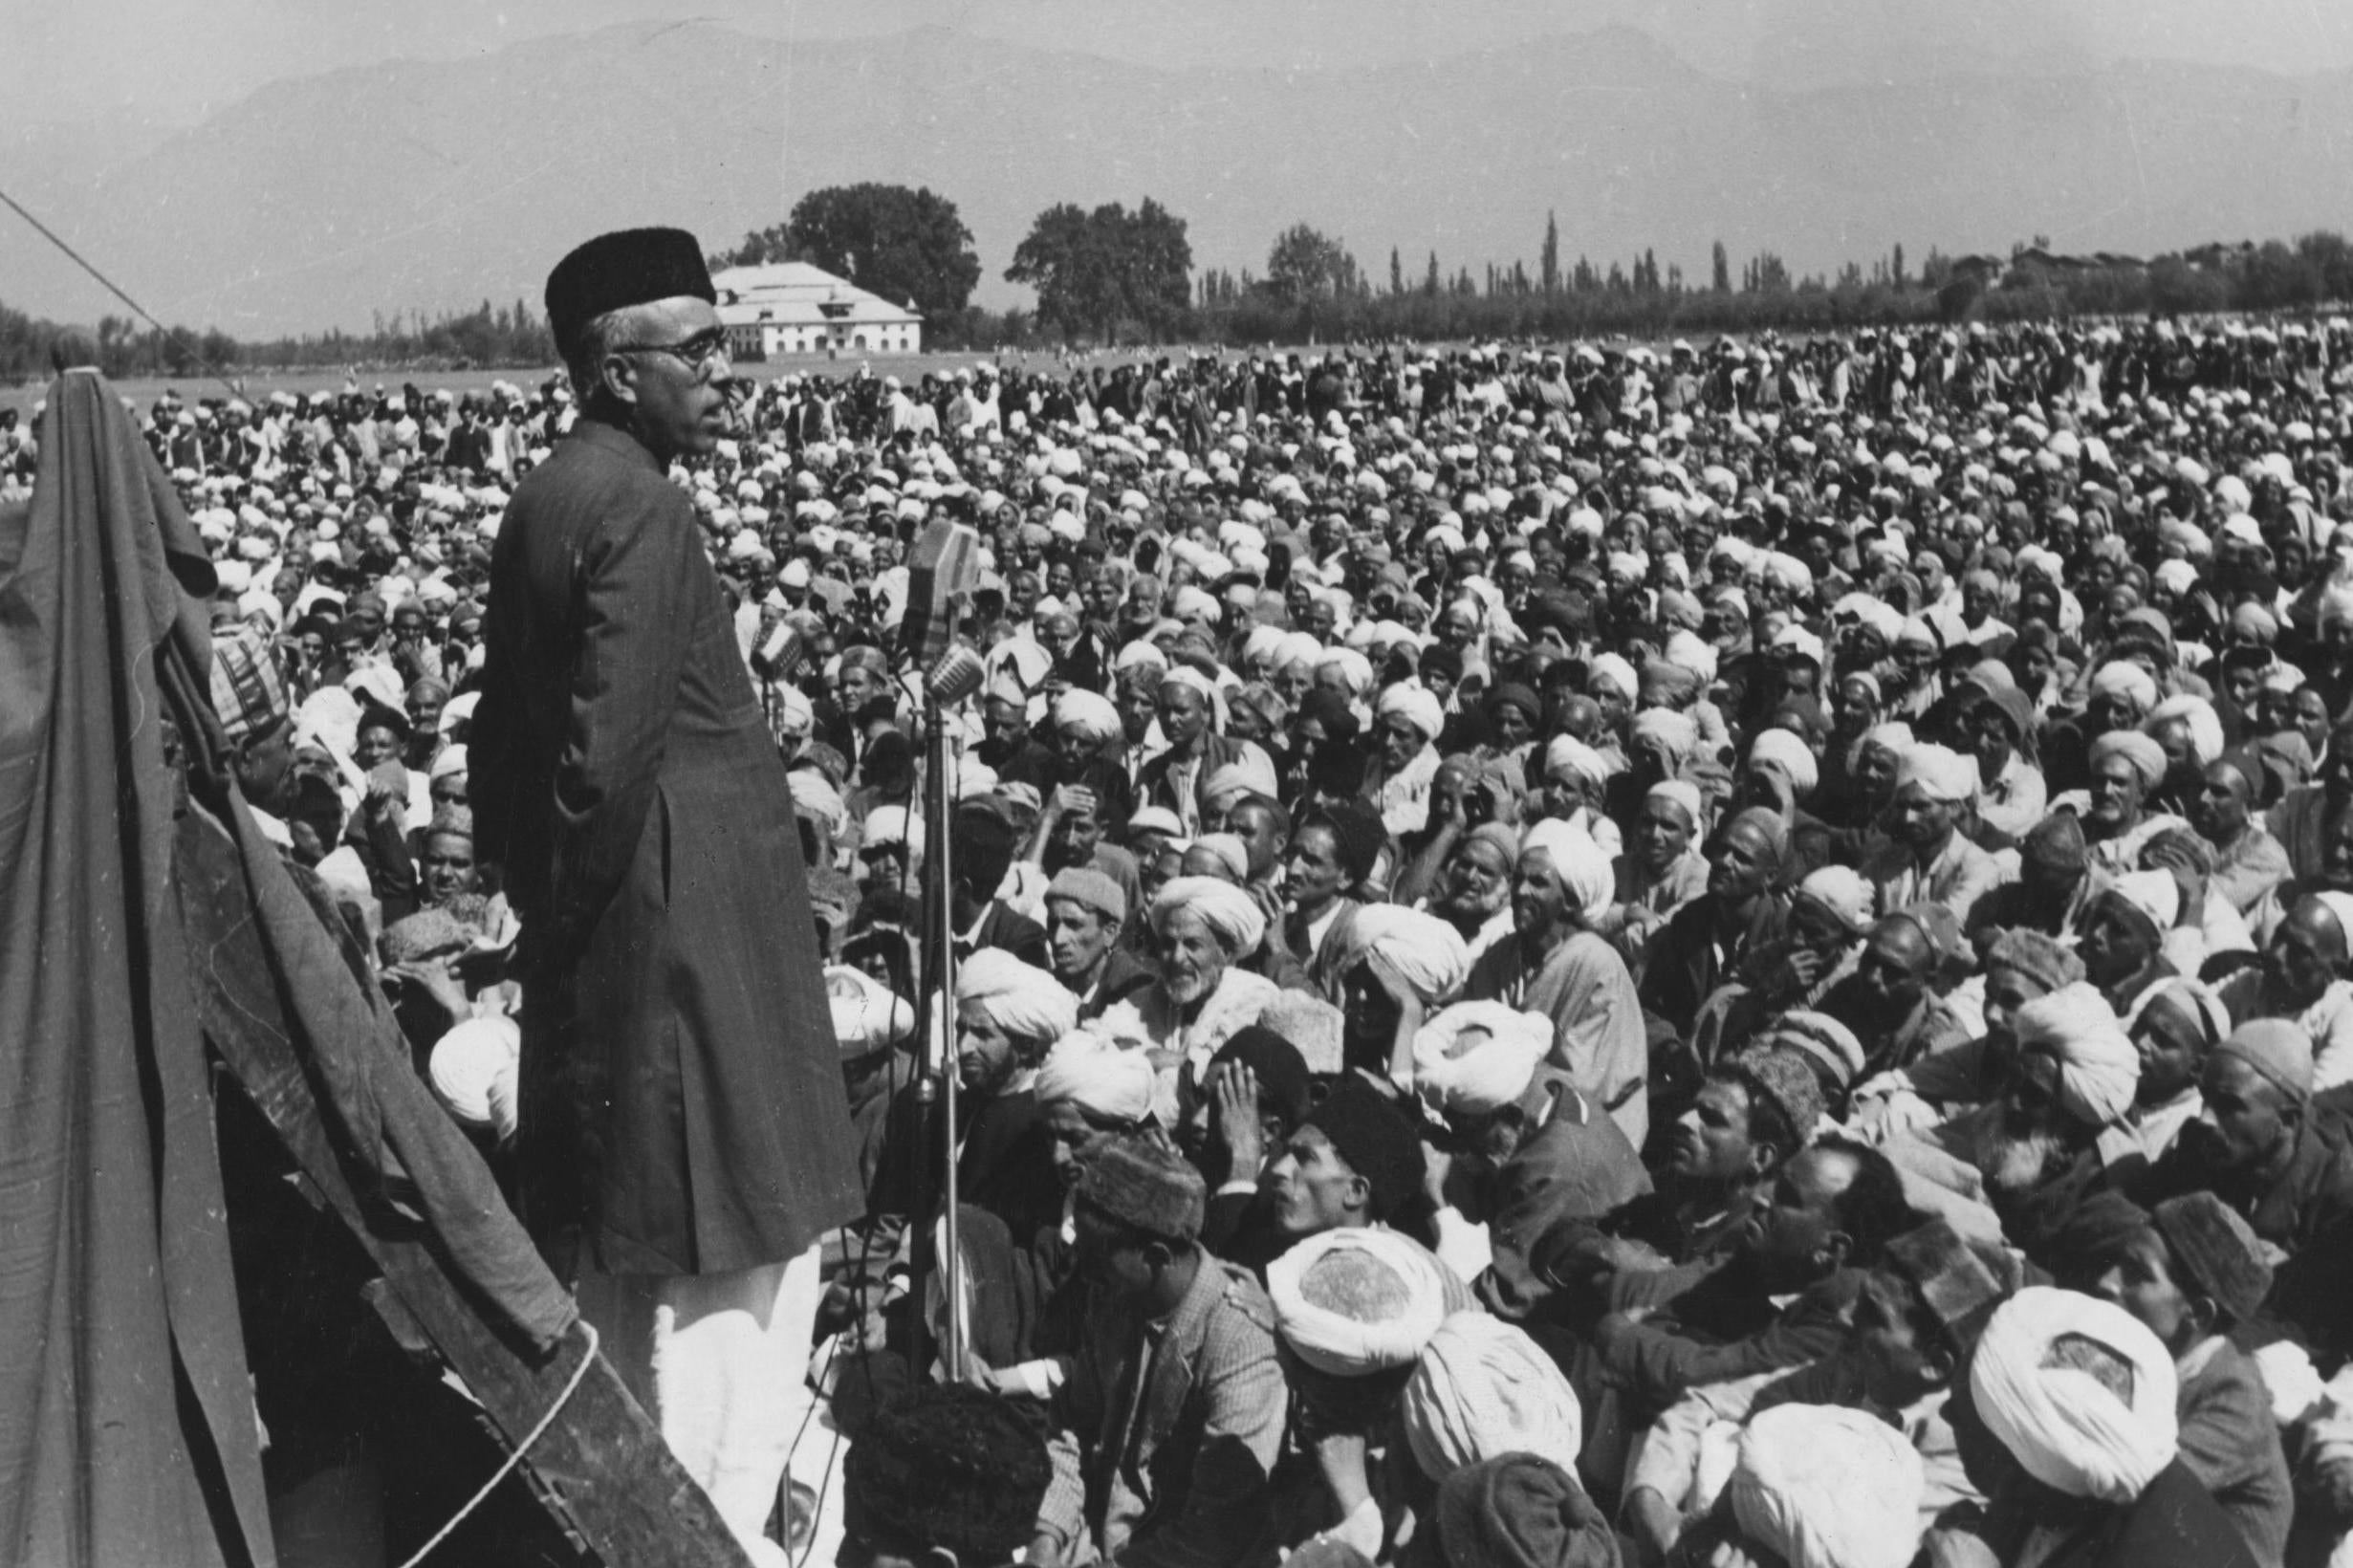 1949: Sheik Abdullah, leader of the Kashmiri government in Srinagar, was in favour of an independent Kashmir in a union with India